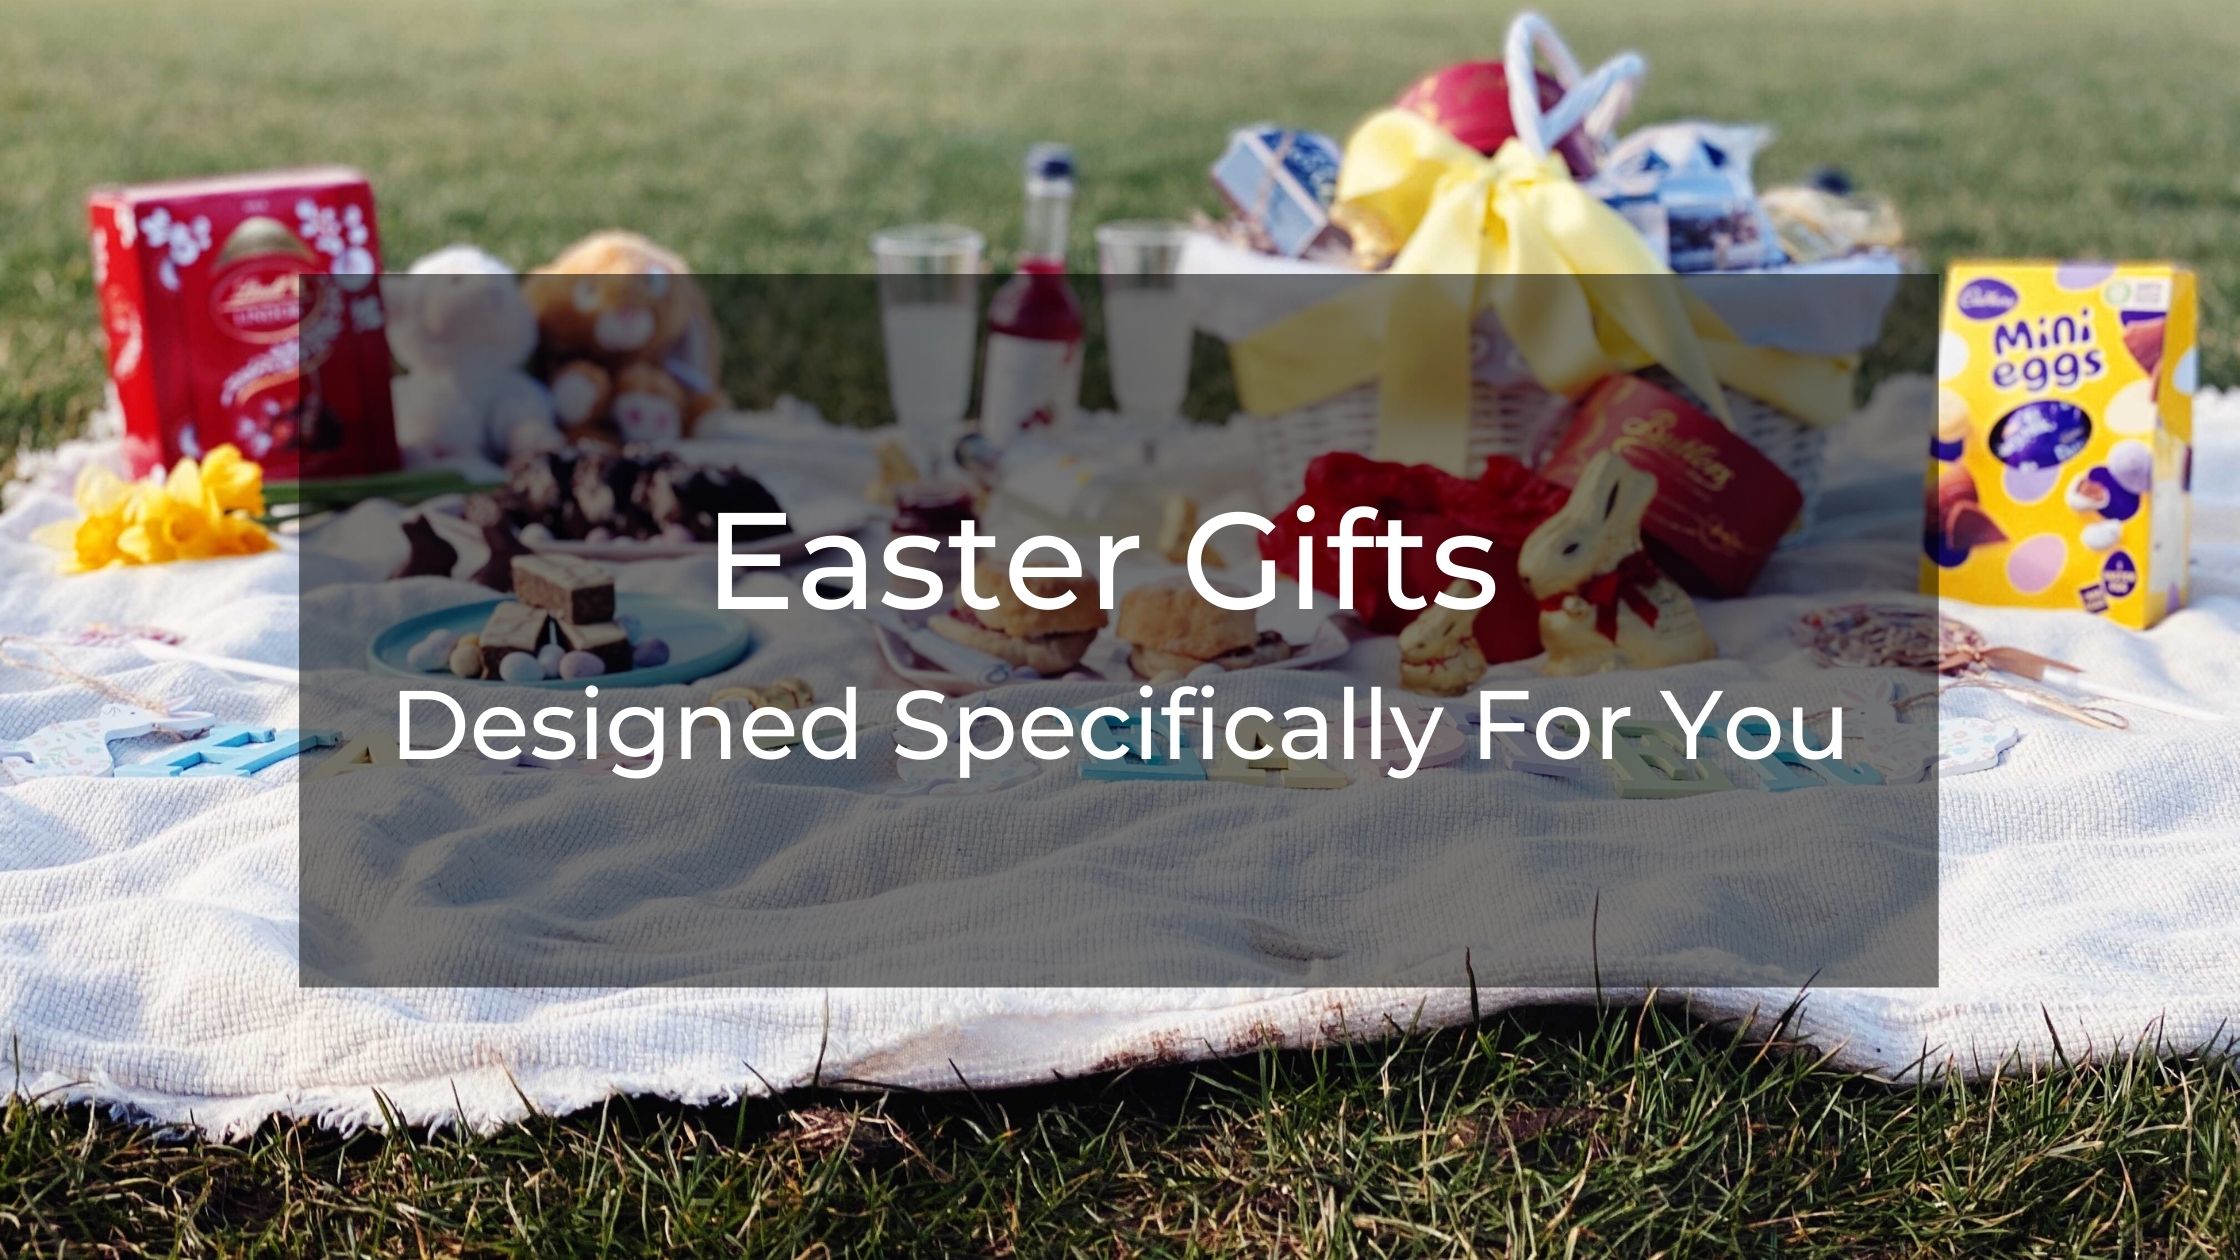 Easter Gifts UK Designed Specifically for You